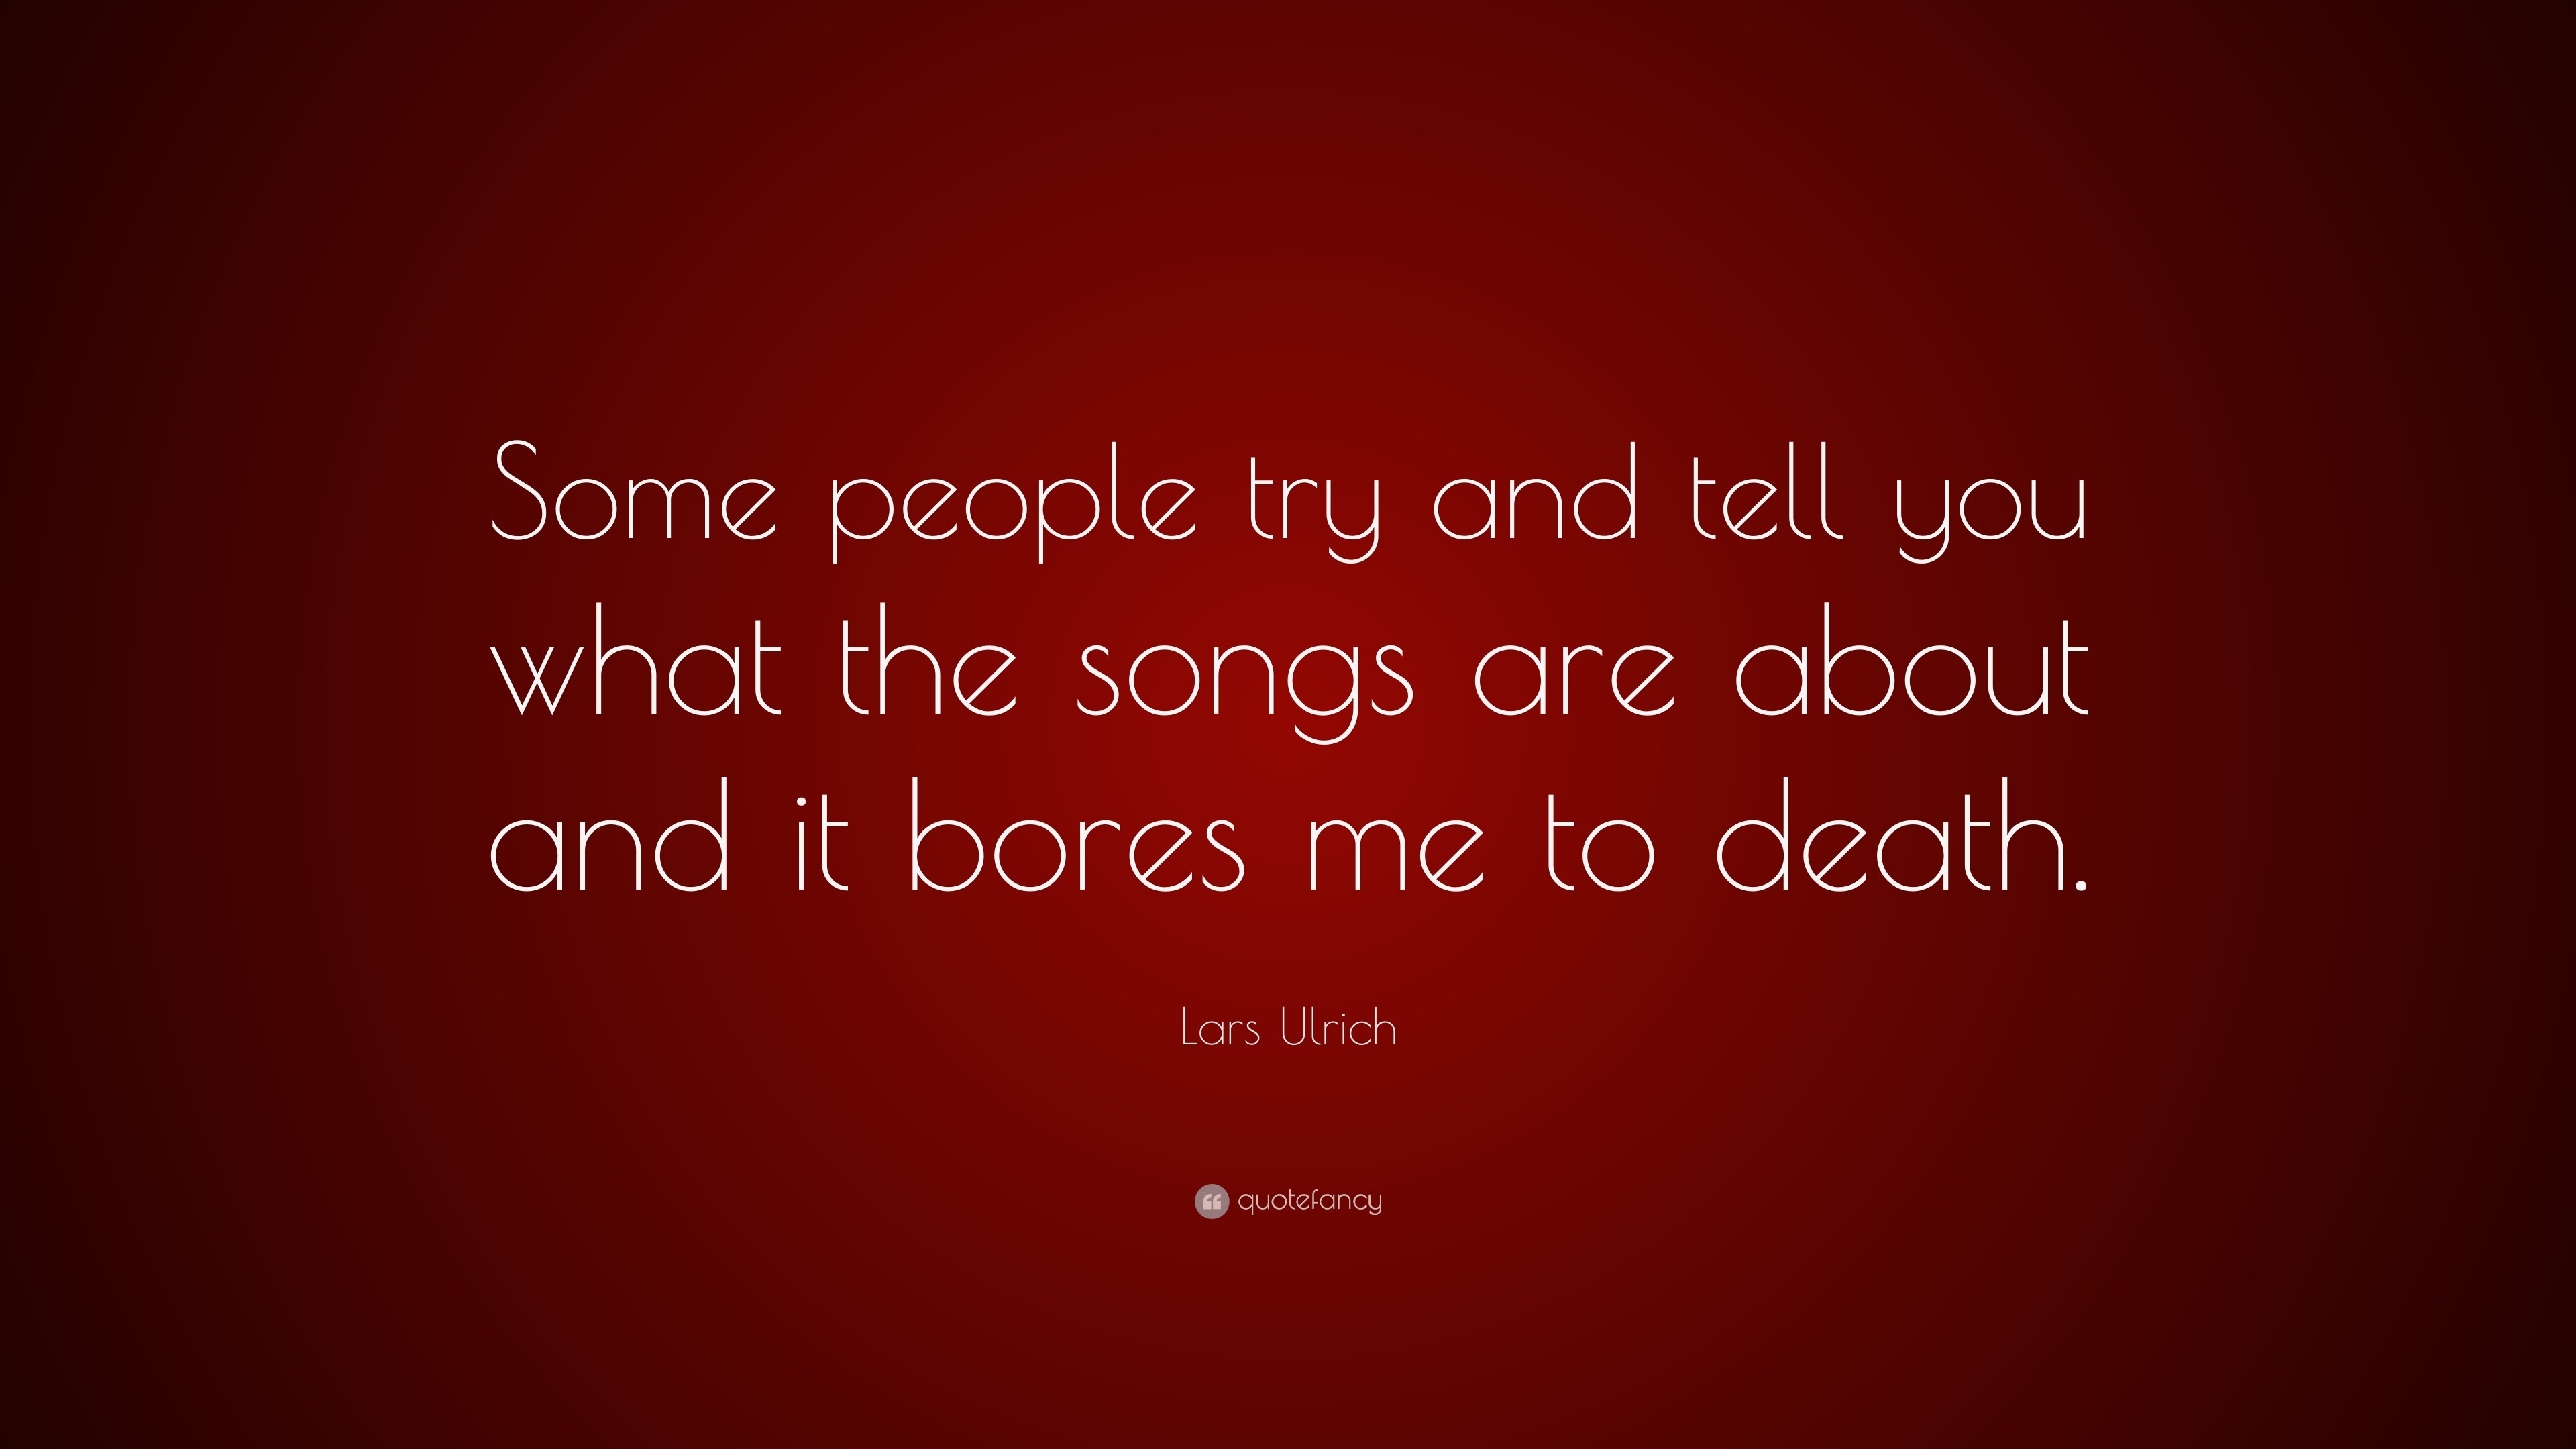 Lars Ulrich Quote: “Some people try and tell you what the songs are ...